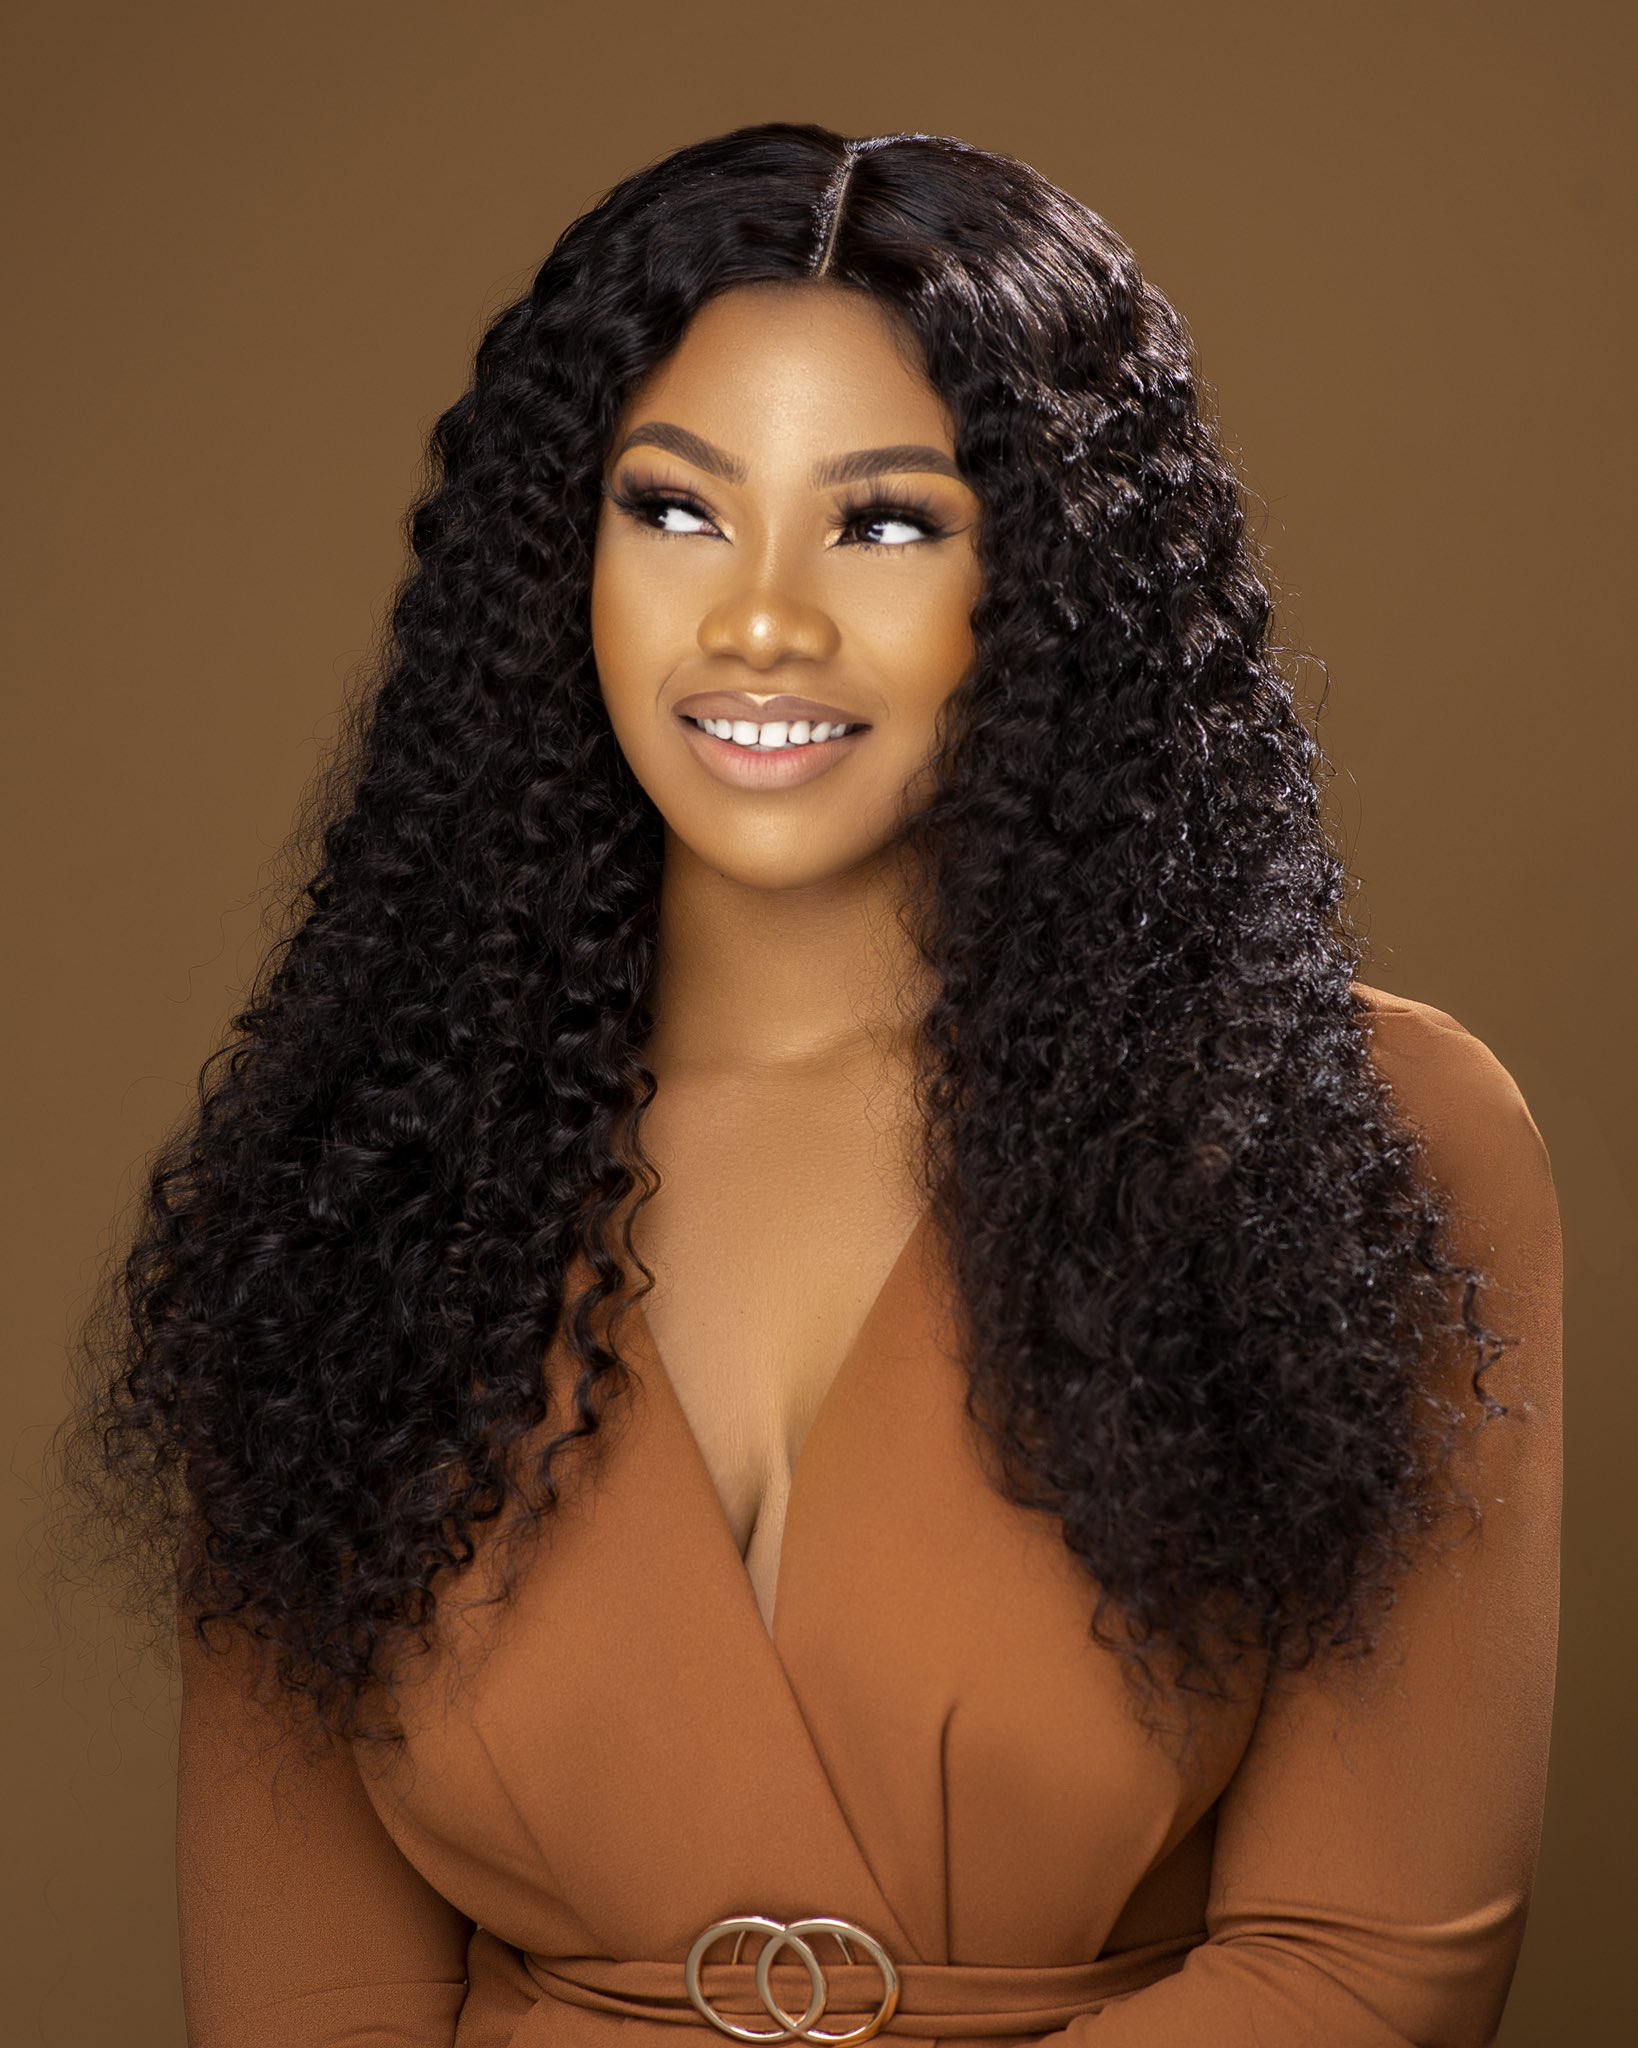 Tacha Releases New Dazzling Pictures, Says It's #JulyWithTacha